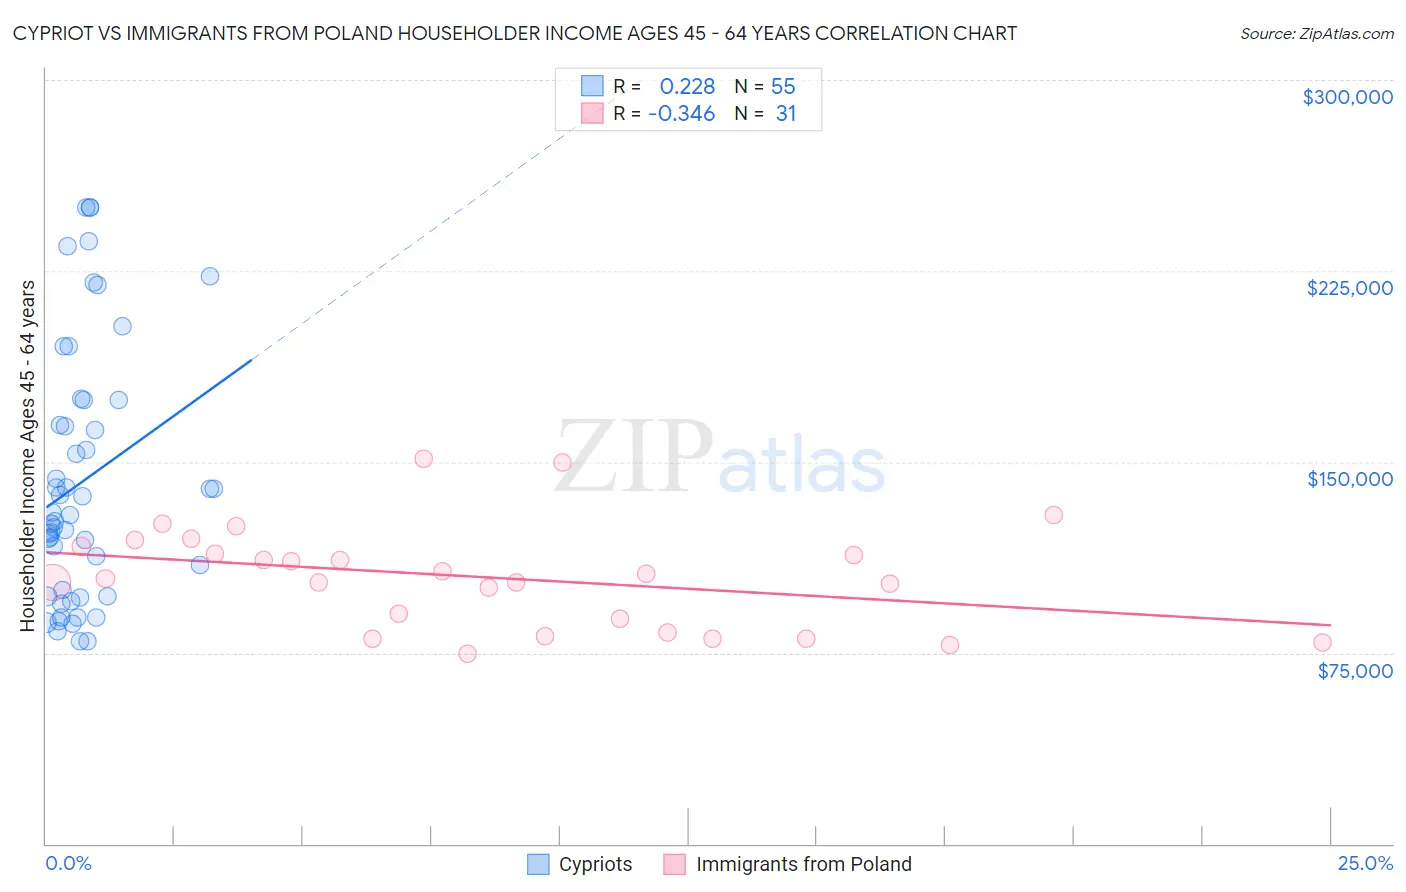 Cypriot vs Immigrants from Poland Householder Income Ages 45 - 64 years